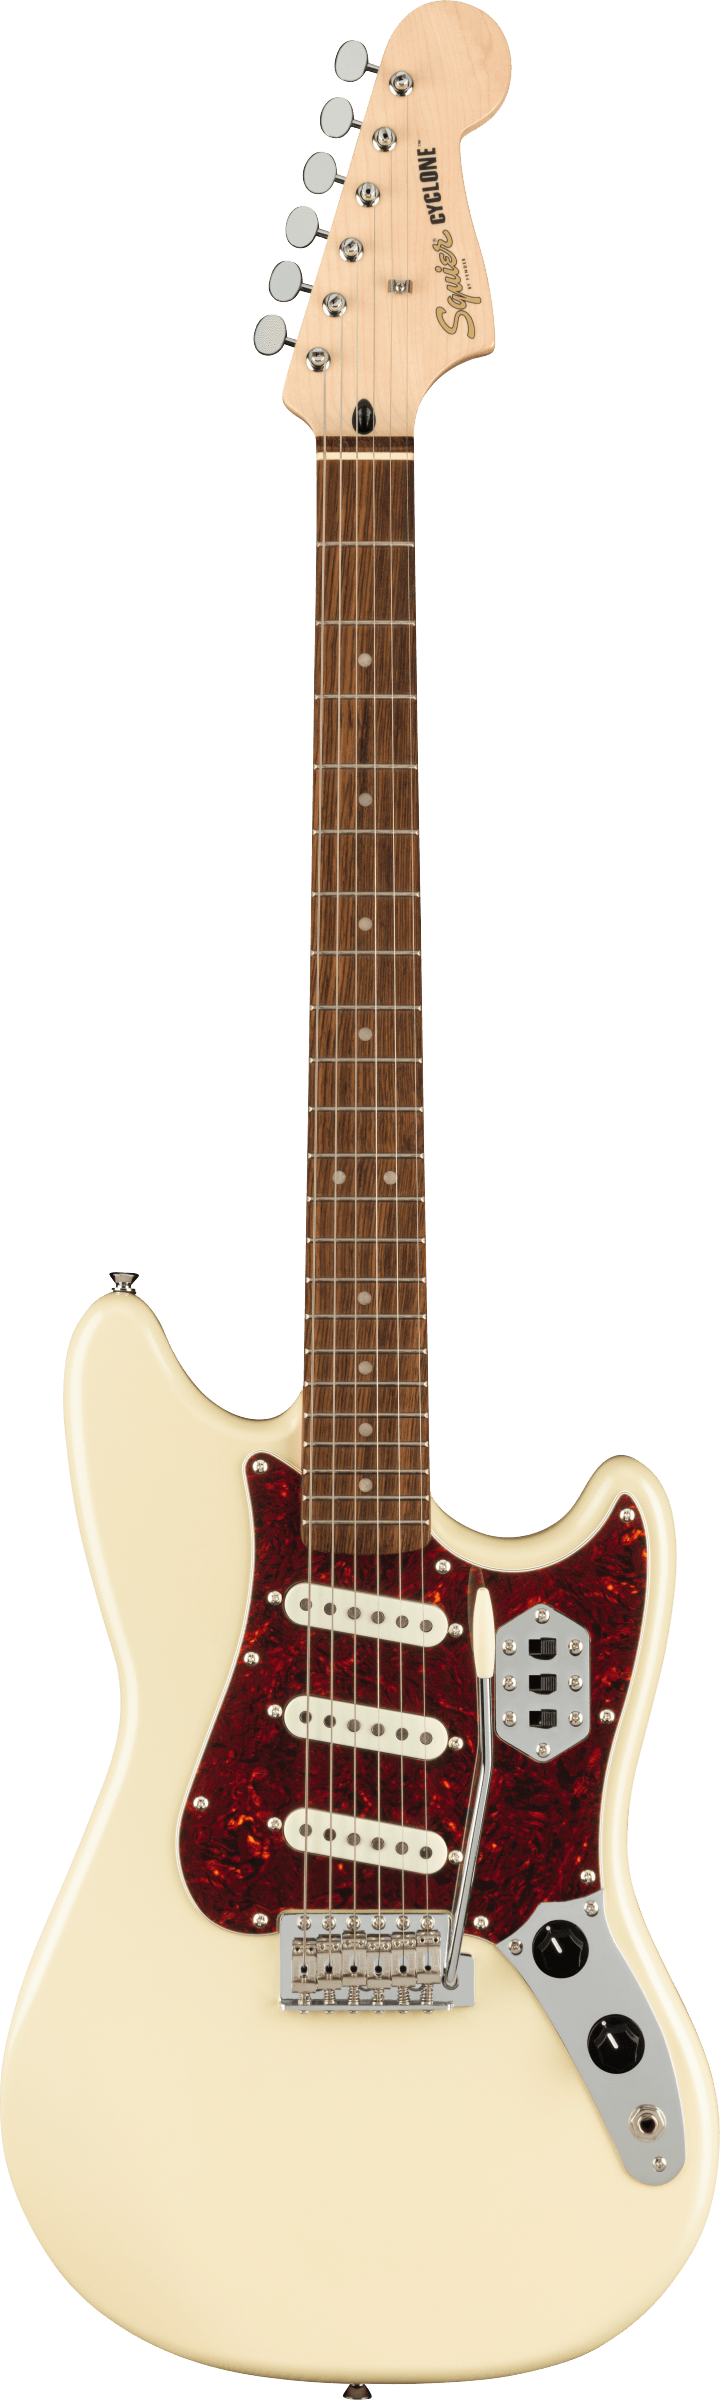 squier paranormal cycloneスクワイア サイクロン - エレキギター